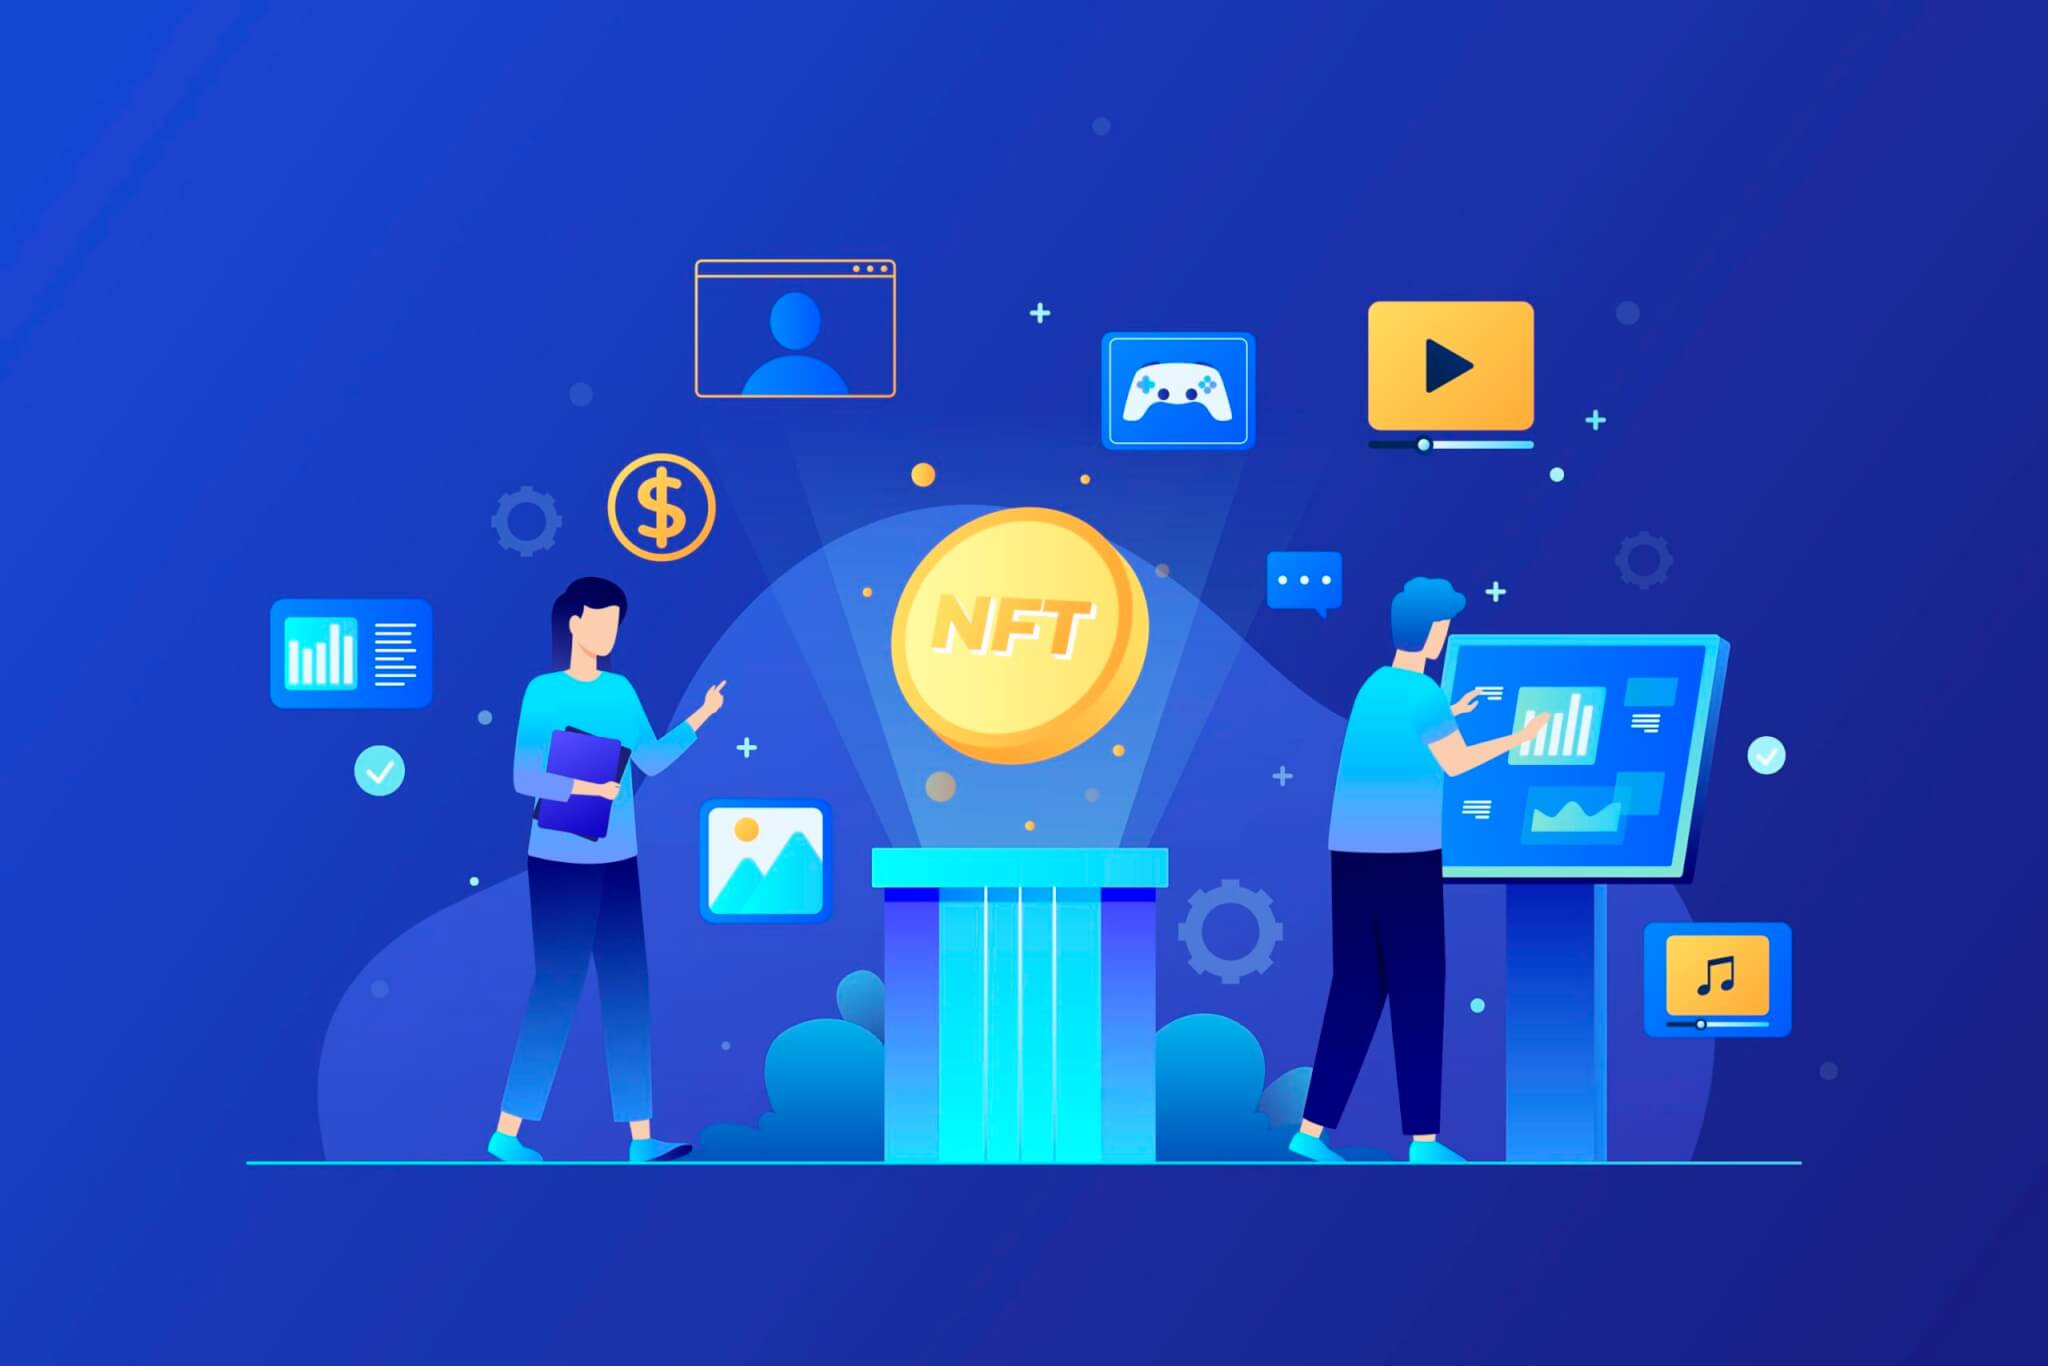 Binance Nft & Benefit: What You Need To Know